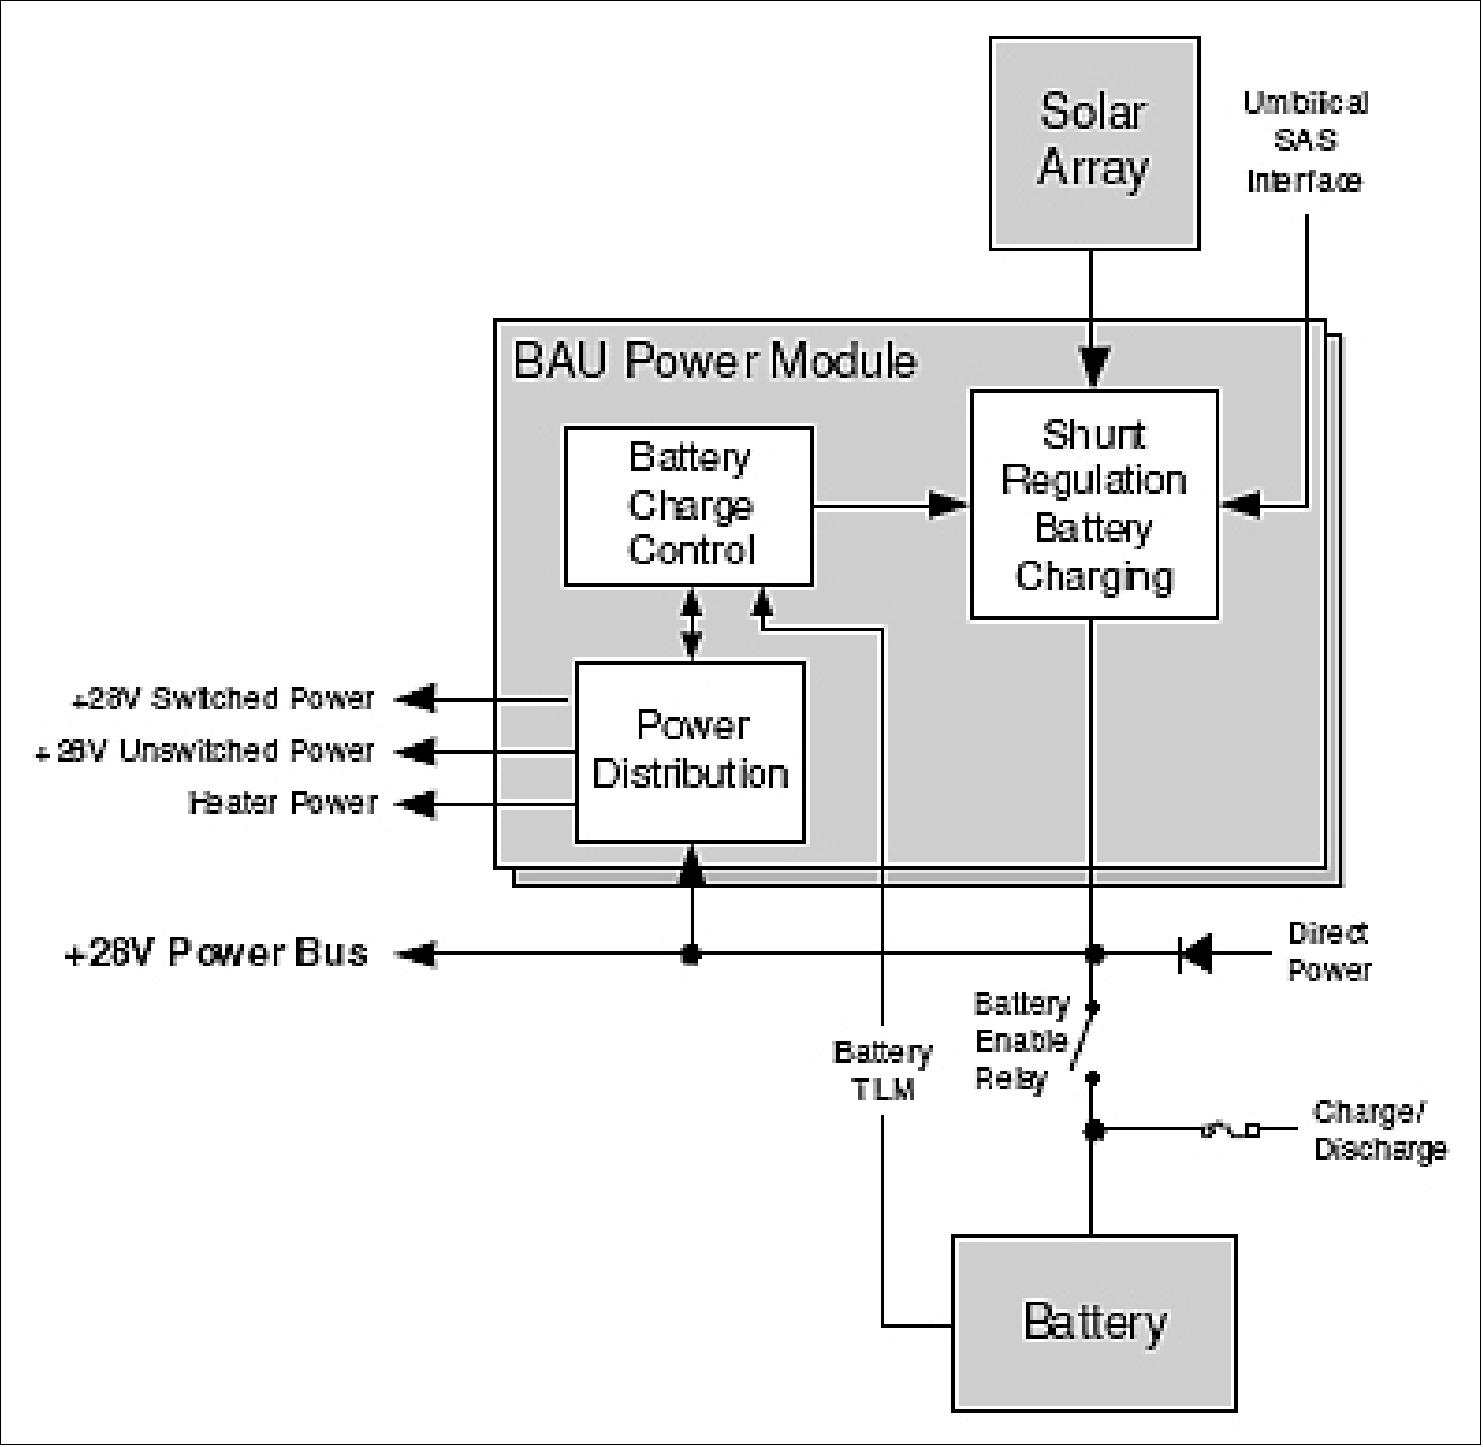 Figure 6: Block diagram of the power subsystem (image credit: ATK Space, Ref. 67)